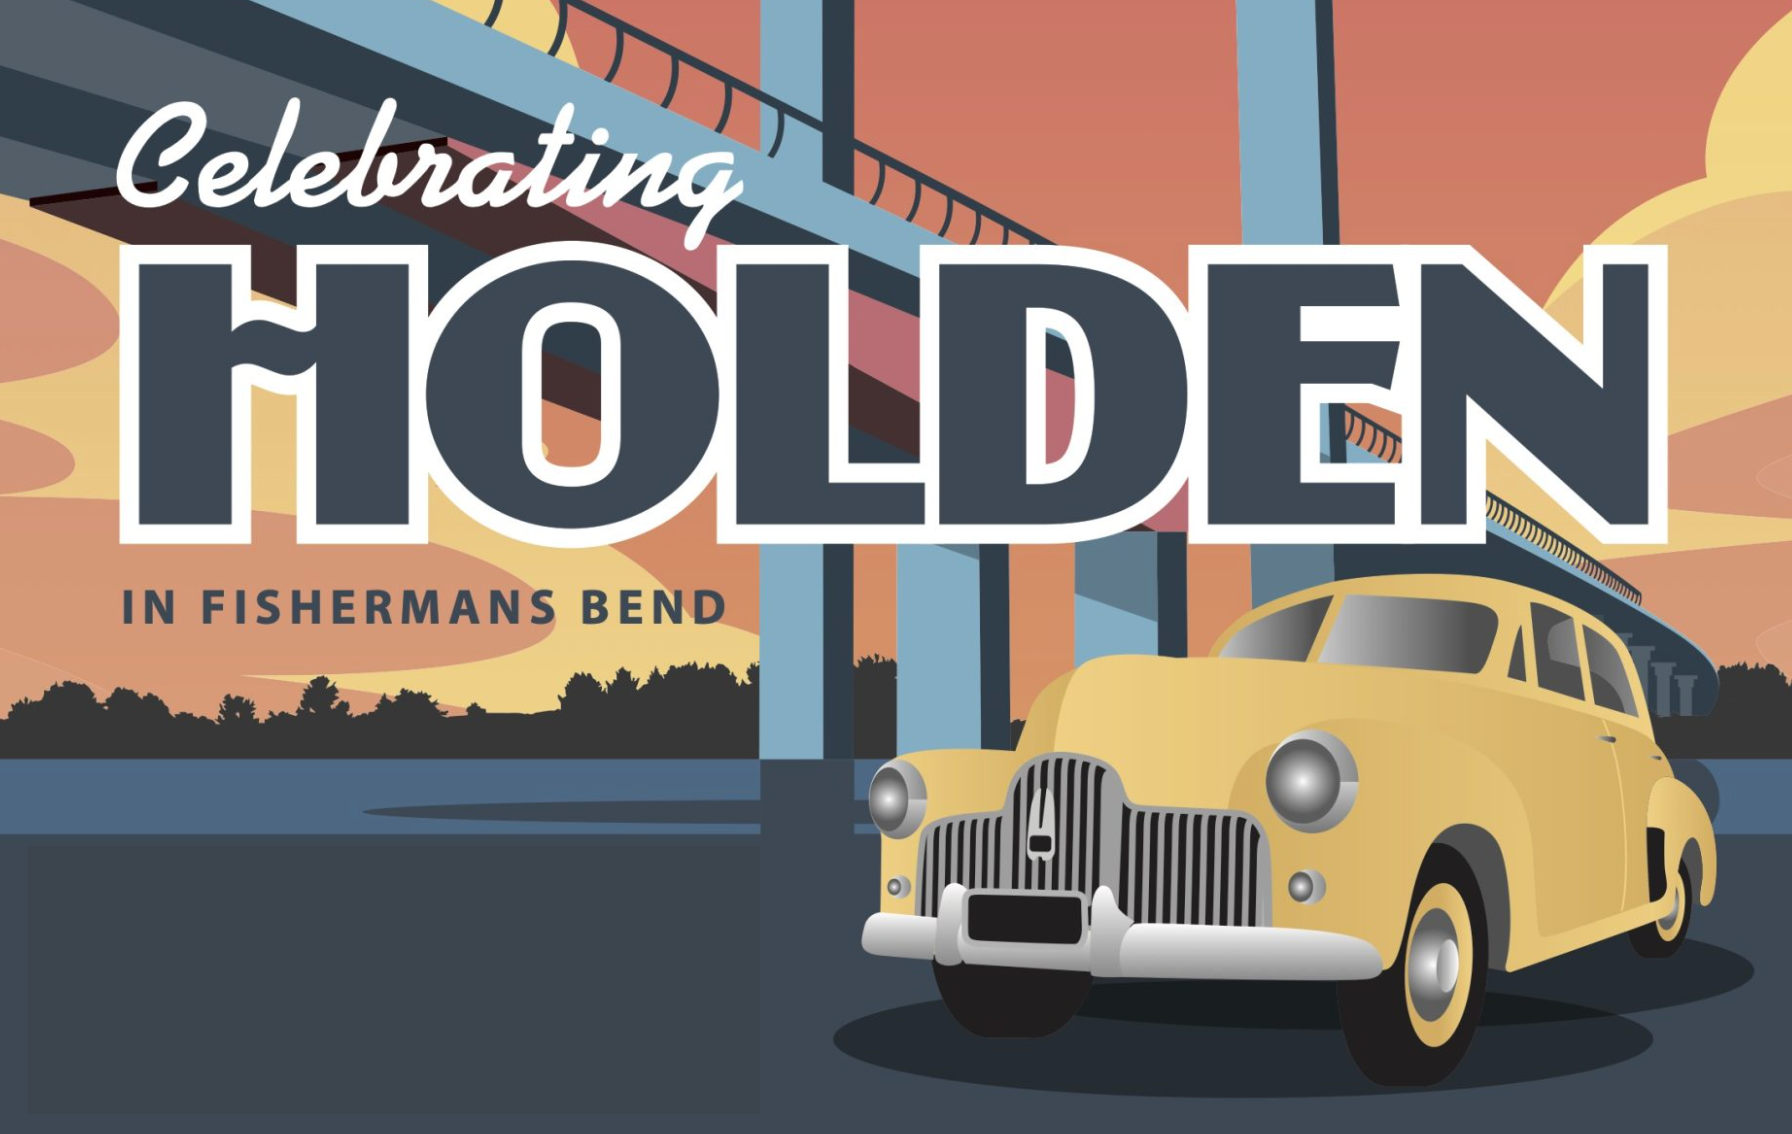 A vintage style poster with the words Celebrating Holden over a stylised image of an old car in front of a bridge in FIshermans Bend